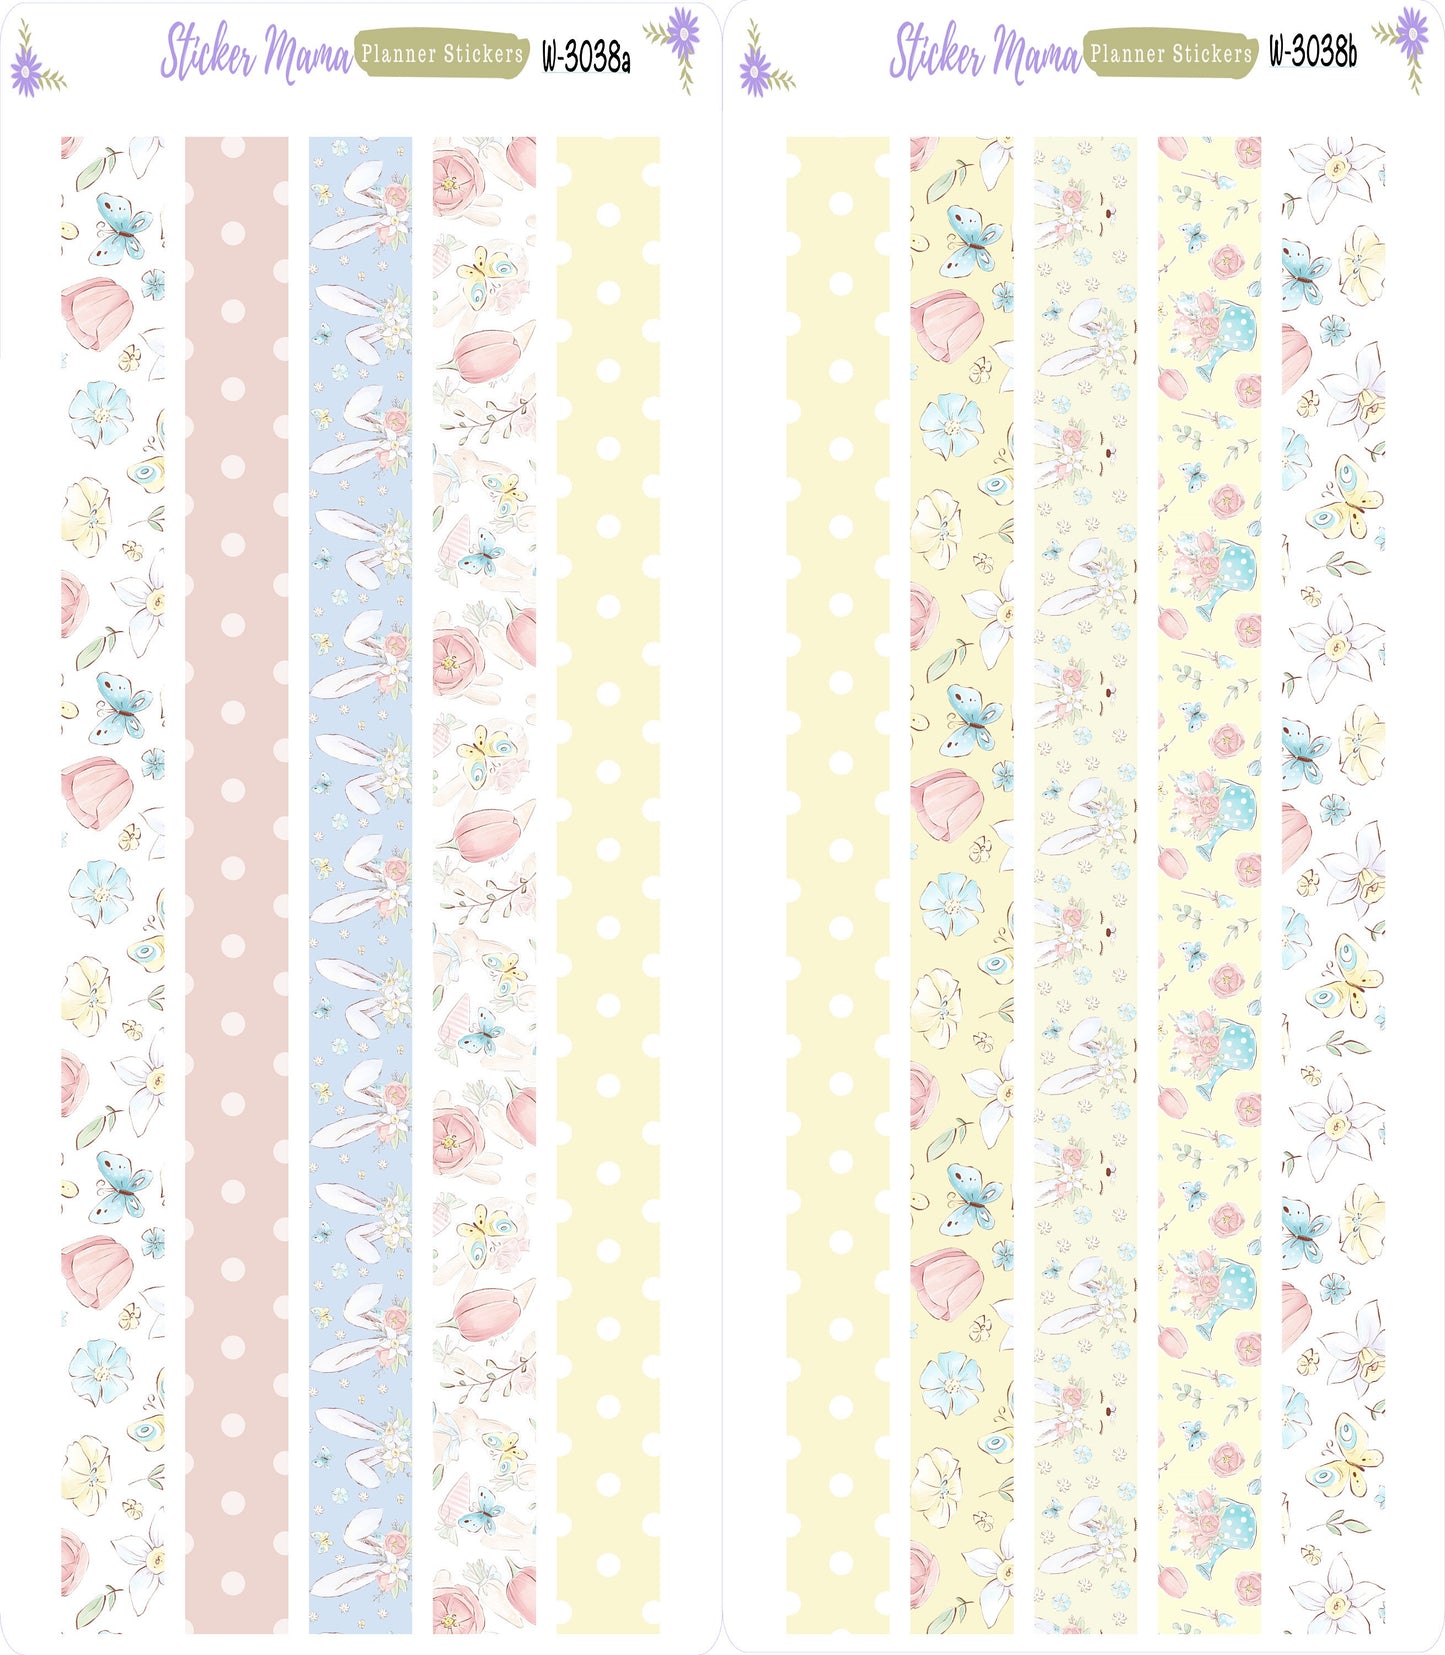 W-3038 "Easter Spring Time" || Washi Stickers || Planner Stickers || Washi for Planners || Easter Sticker Kit